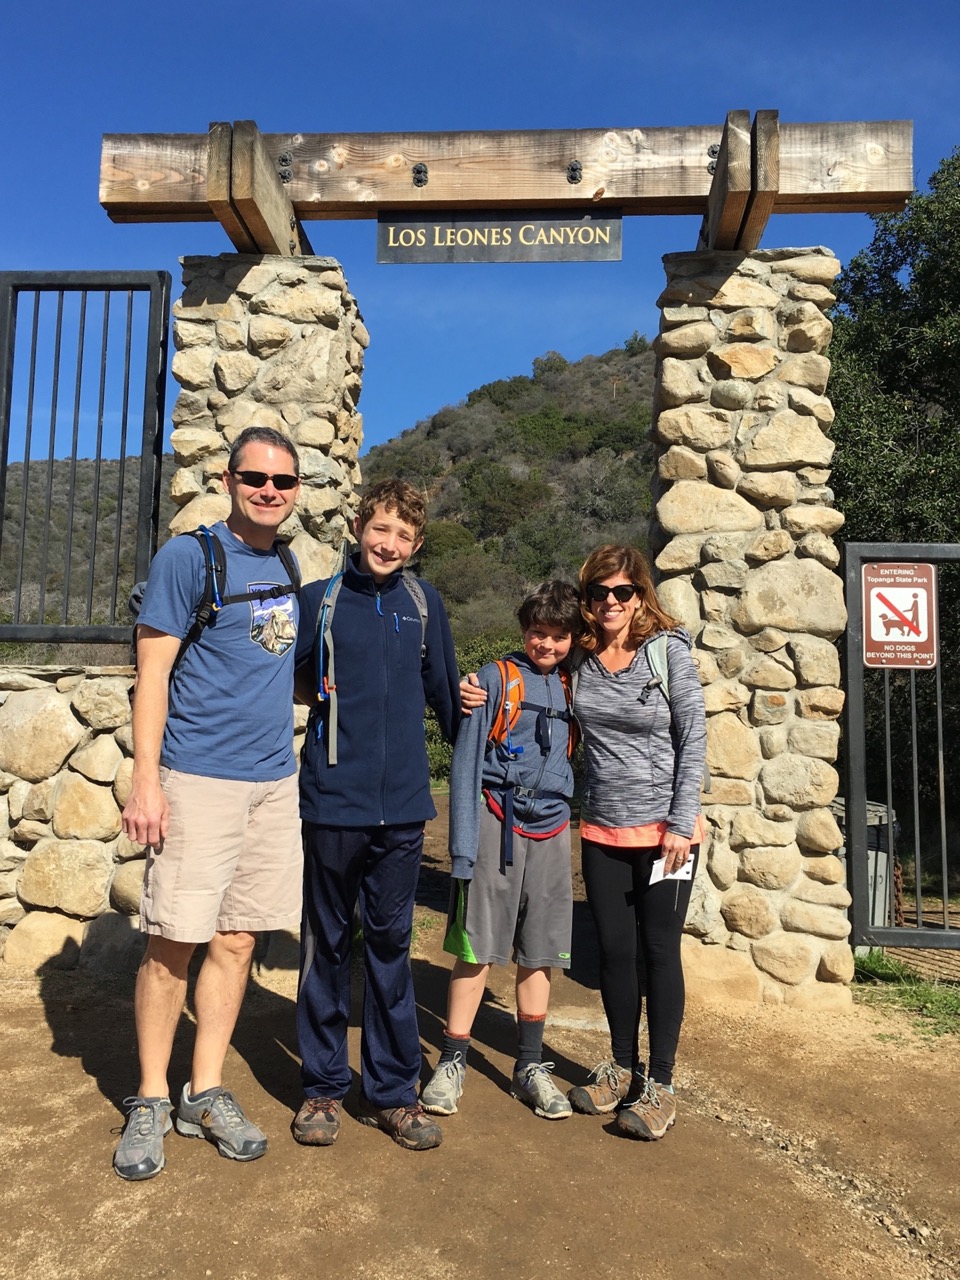 The beginning of the Los Leones Canyon Trail in Pacific Palisades